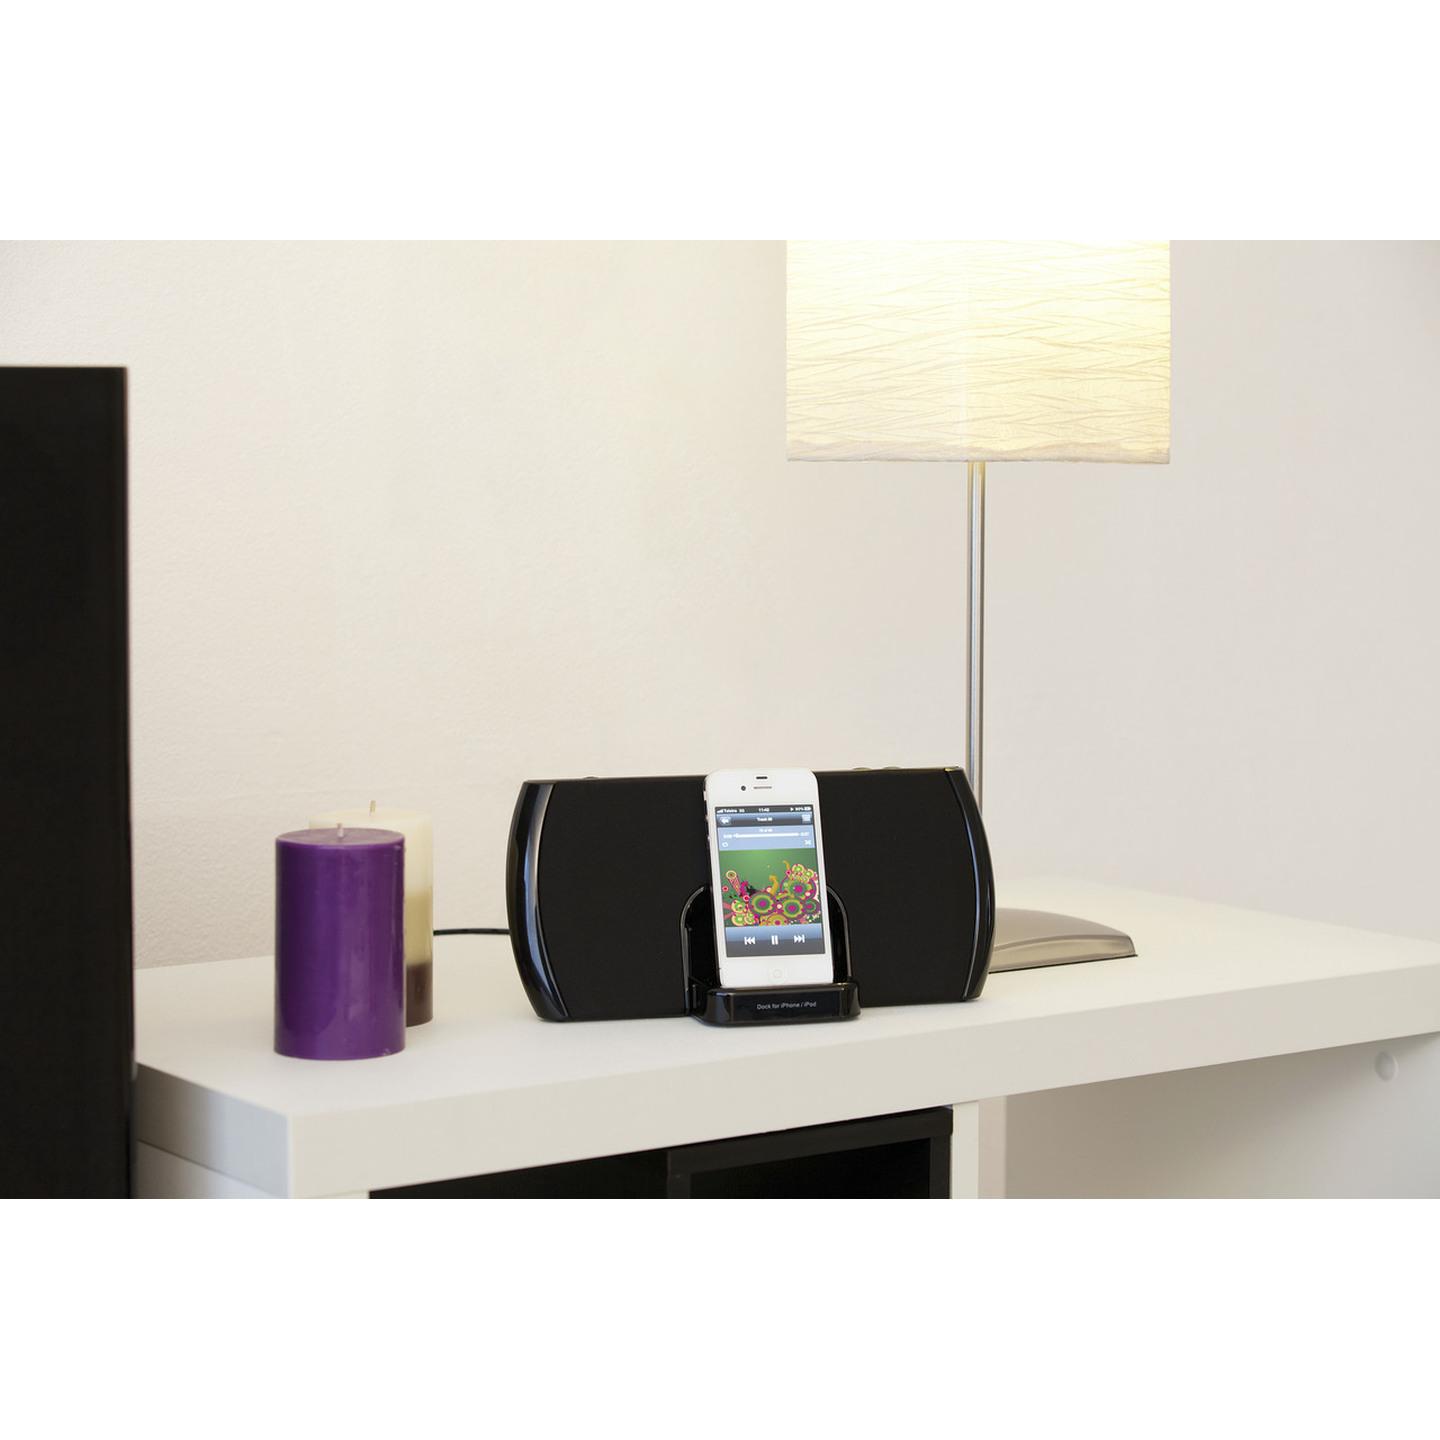 Portable Stereo Speakers/Charger with Docking Station for iPhone/iPod